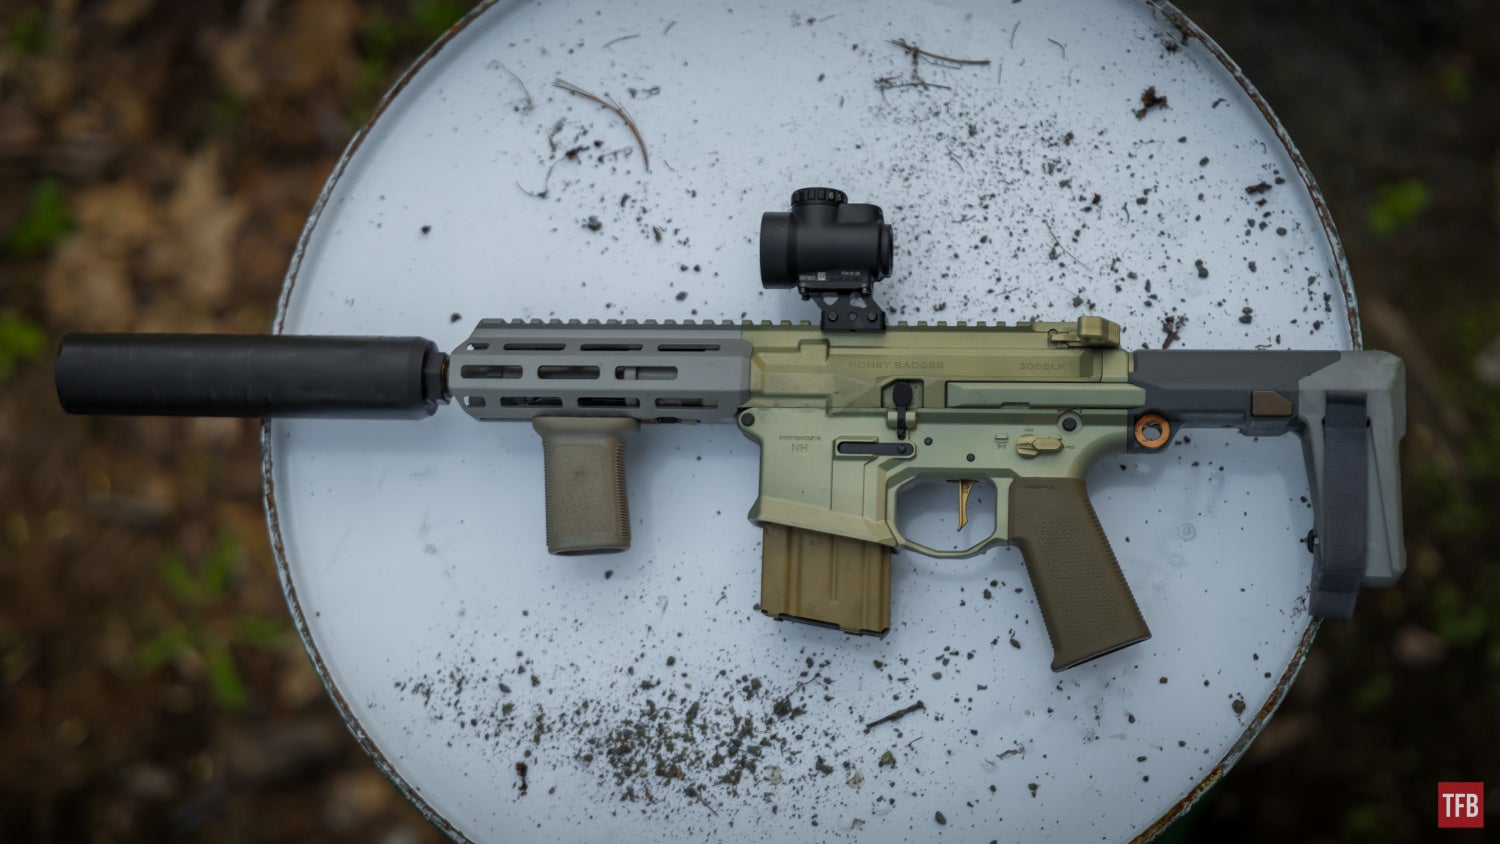 SILENCER SATURDAY #176: The Q Honey Badger And Thunder Chicken